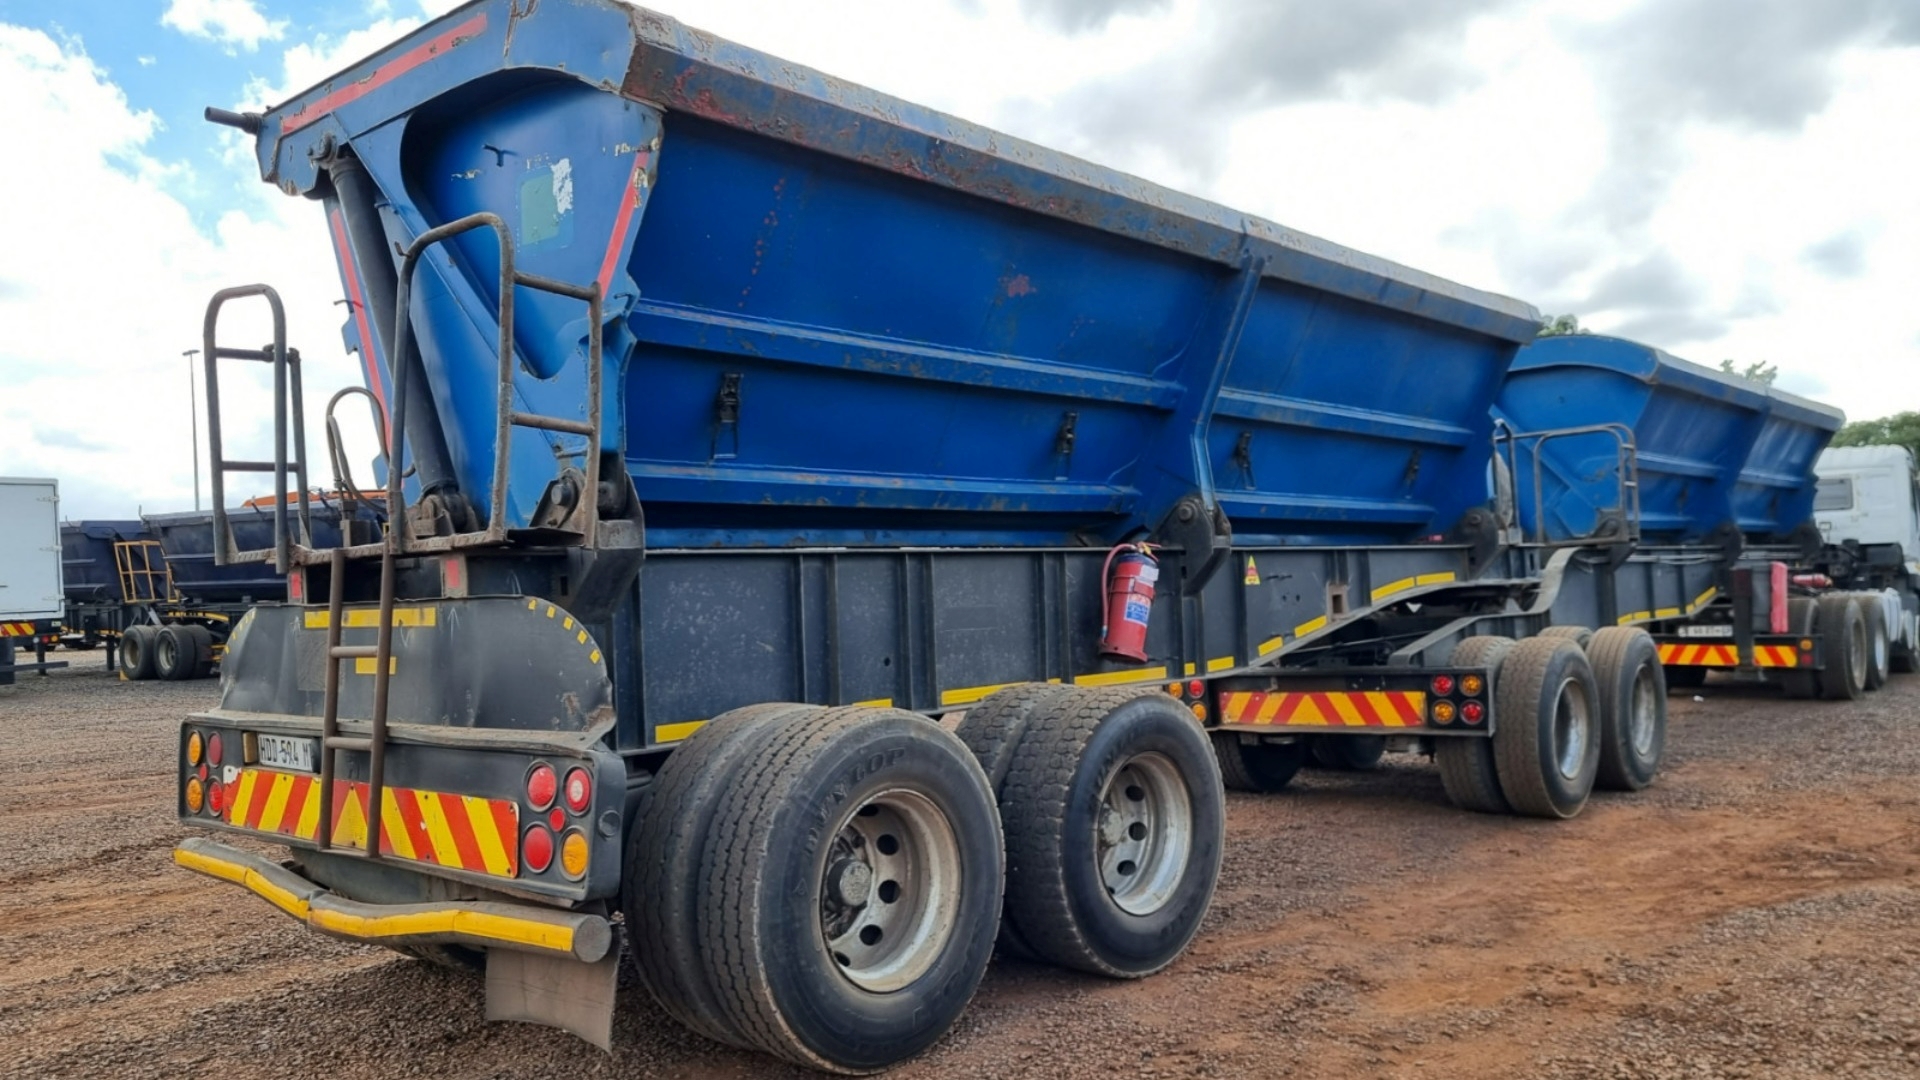 Trailers TOP TRAILER SIDE TIPPER LINK for sale by WCT Auctions Pty Ltd  | Truck & Trailer Marketplaces